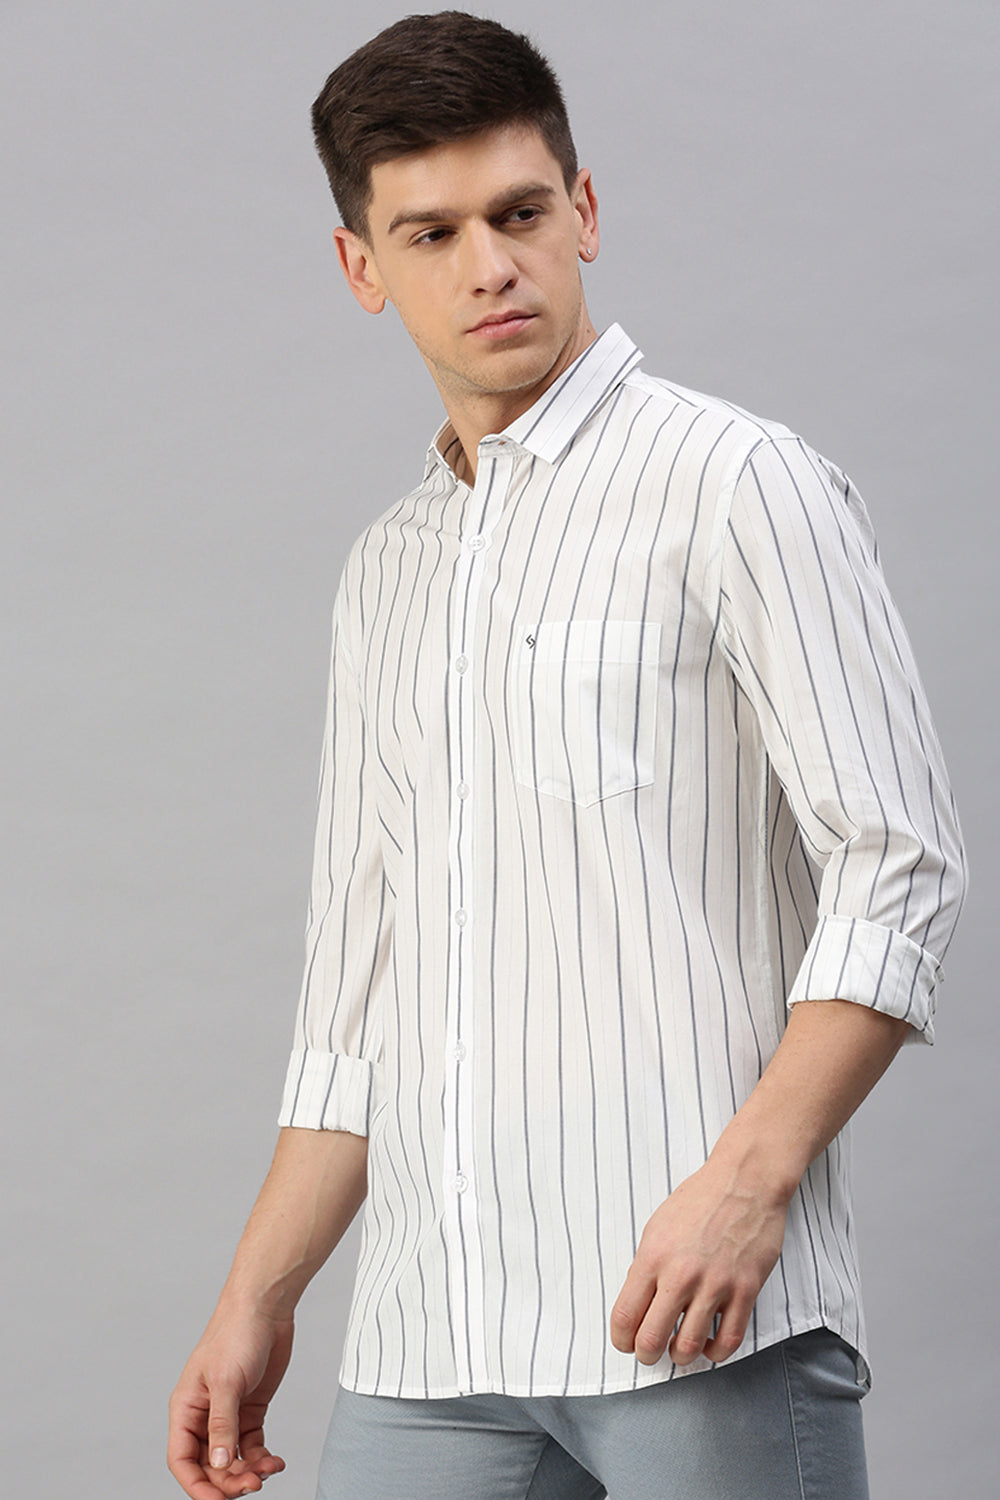 Classic Polo Men's Cotton Full Sleeve Striped Slim Fit Polo Neck White Color Woven Shirt | So1-103 A